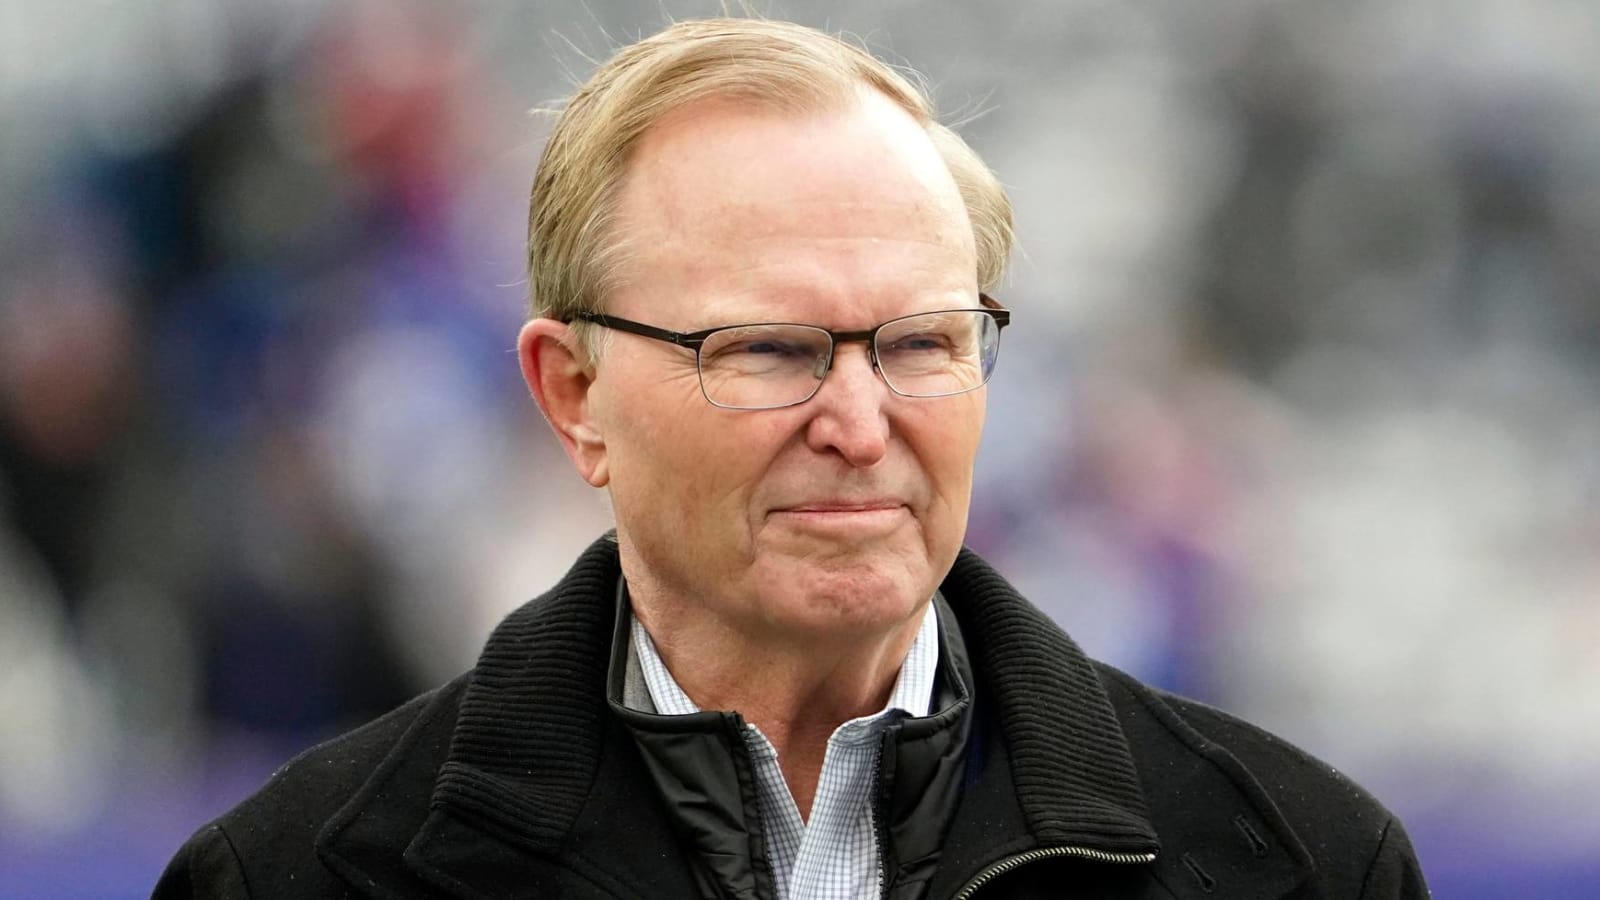 Giants owner delivers harsh take on current state of team